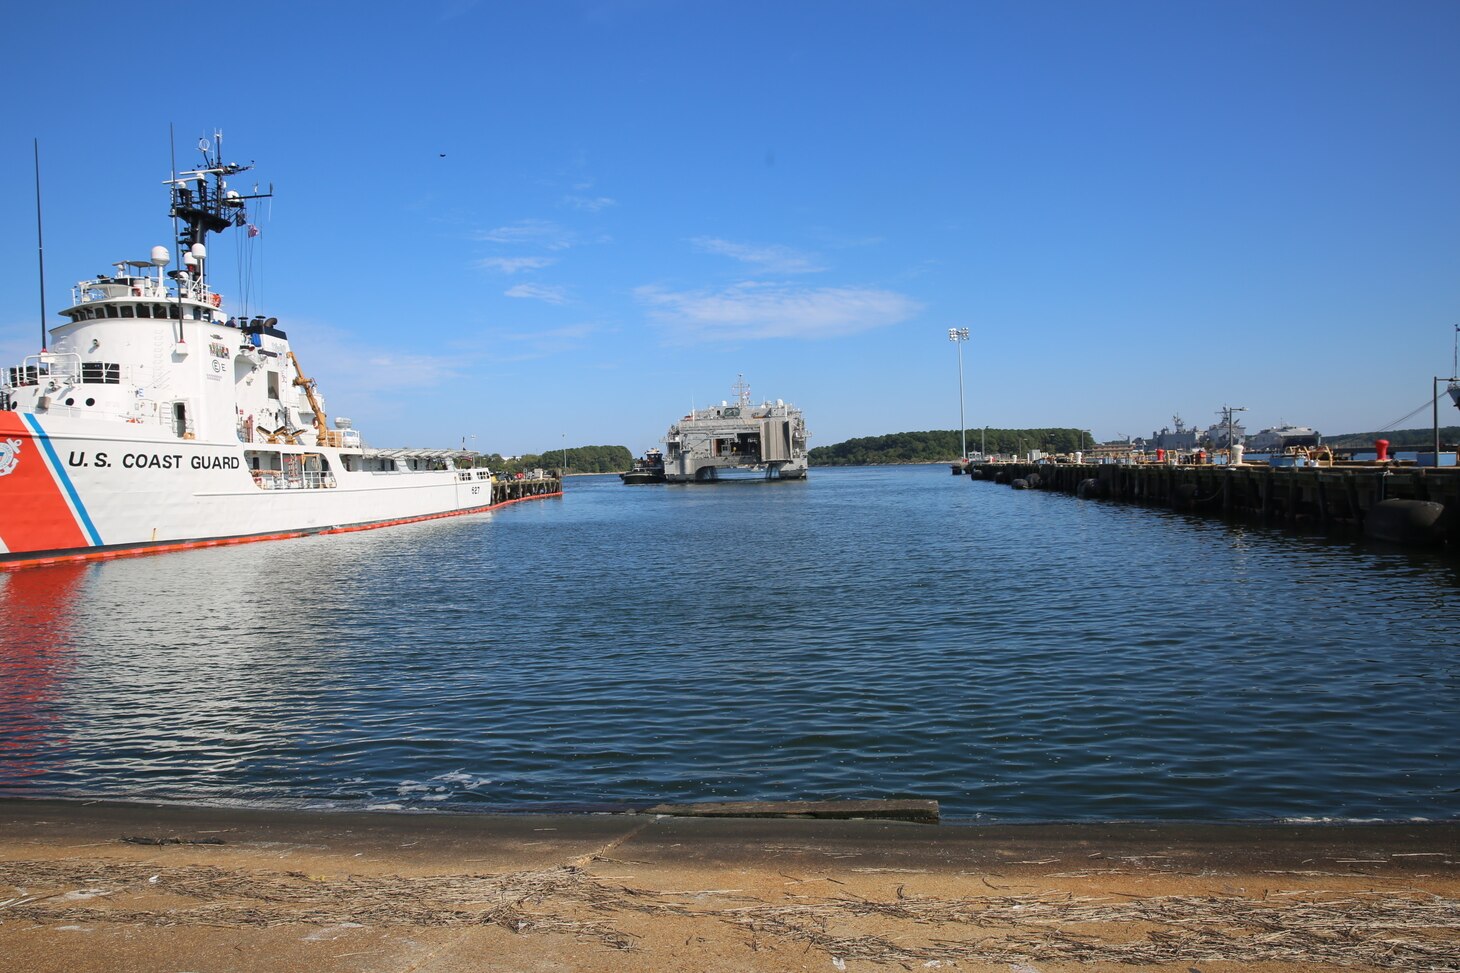 USNS Burlington (T-EPF 10) returned home to Joint Expeditionary Base Little Creek – Fort Story, Va., Oct. 15, after a three and a half month deployment in U.S. Naval Forces Southern Command, U.S. Fourth Fleet’s area of operations, which includes the waters adjacent to Central and South America and the Caribbean Sea.